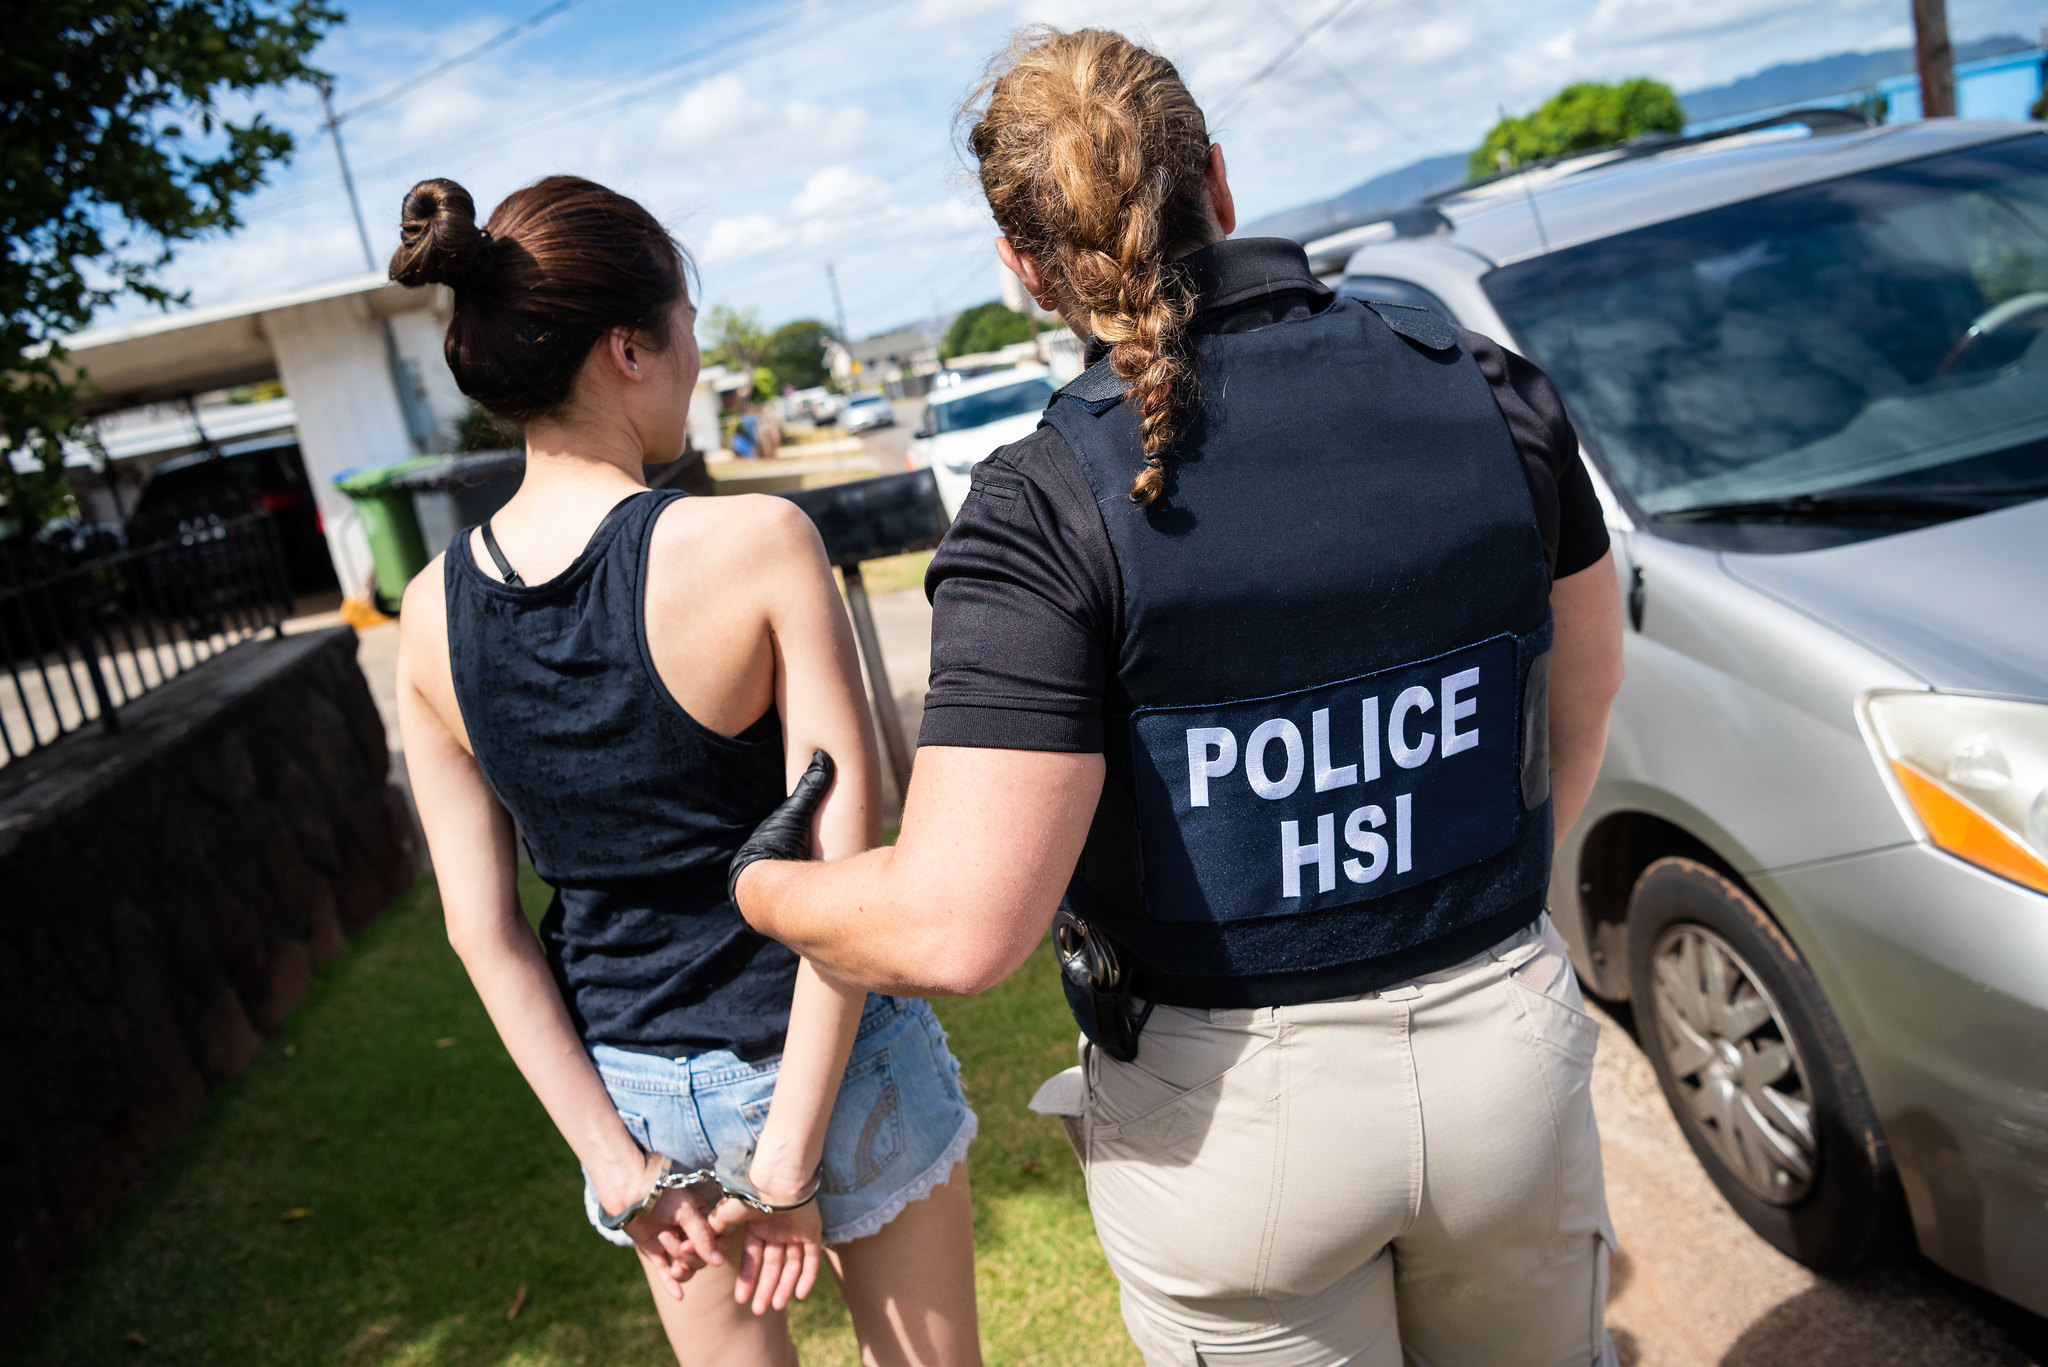 HSI and partner law enforcement serve search and arrest warrants at illegal gaming houses and other locations